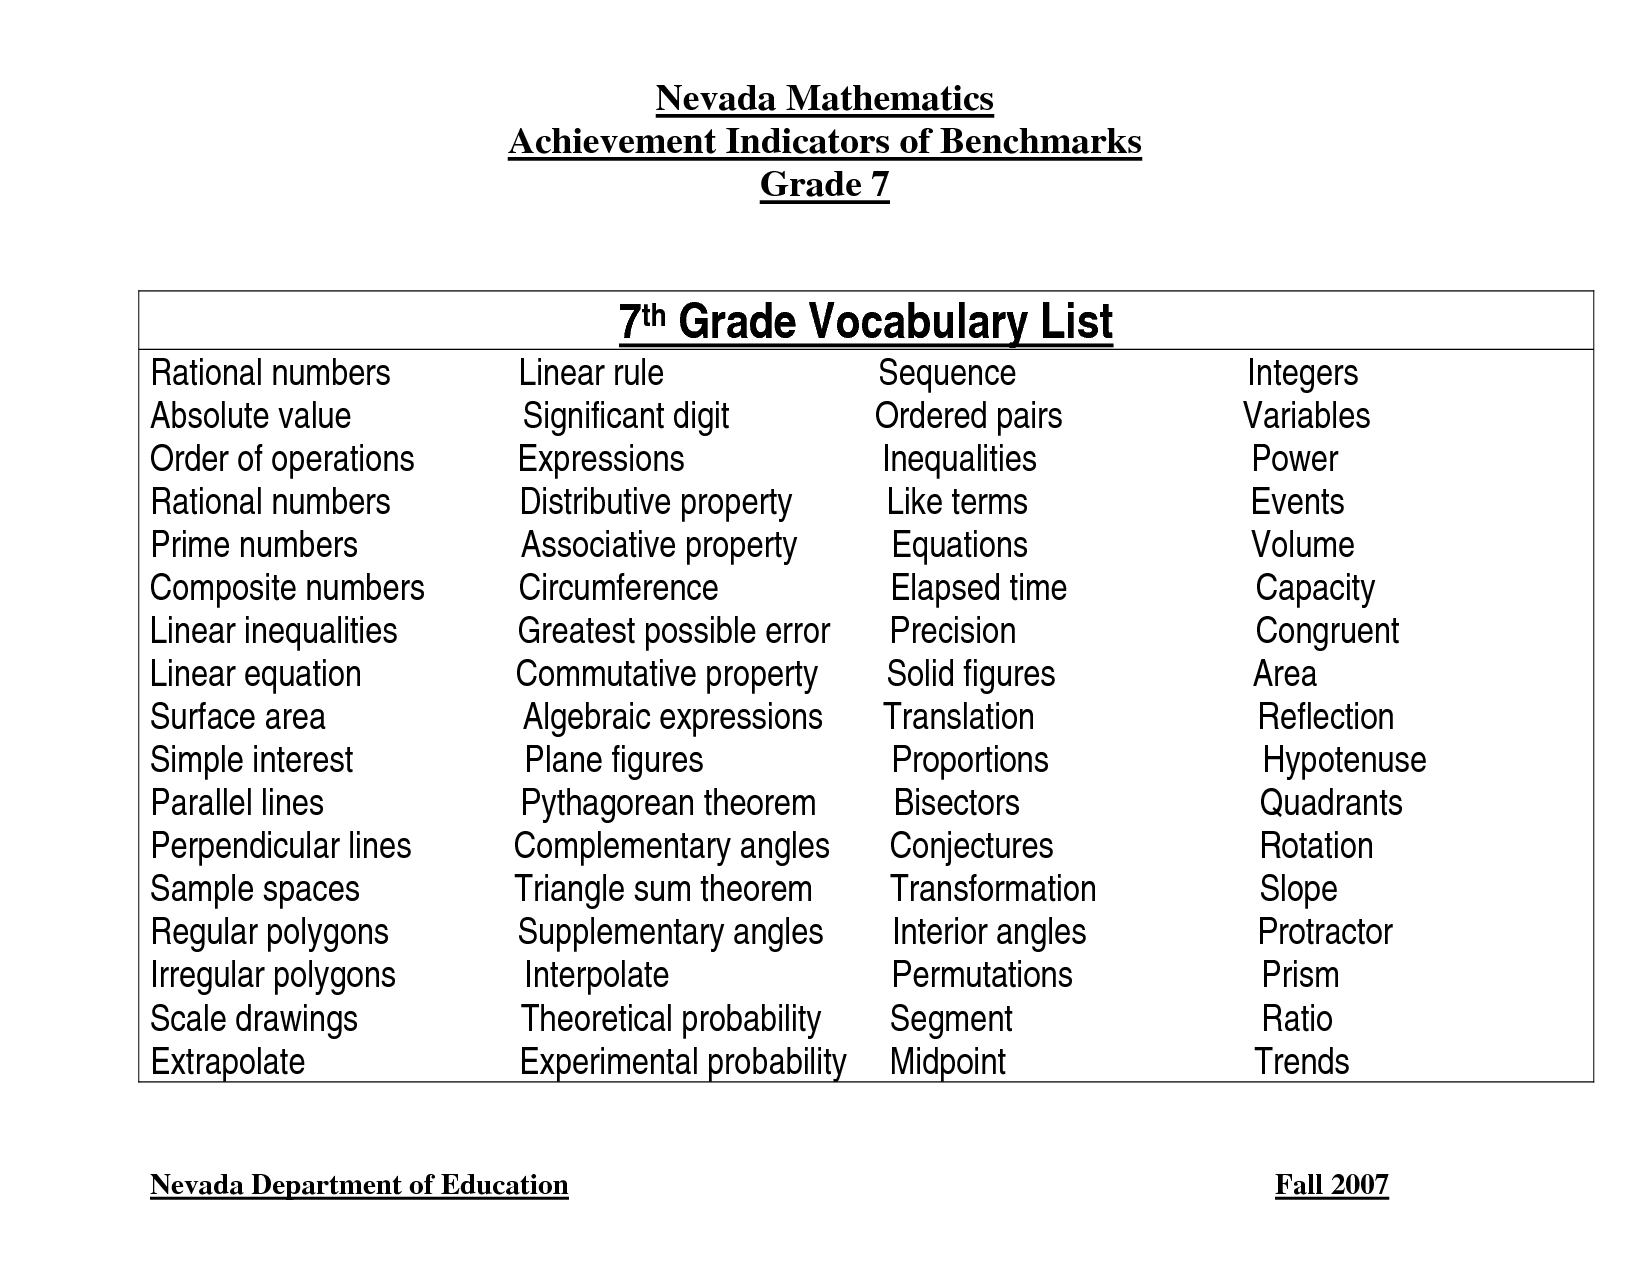 7Th Grade Spelling Worksheets Free Printable The Best Worksheets regarding Free Printable 7Th Grade Vocabulary Worksheets